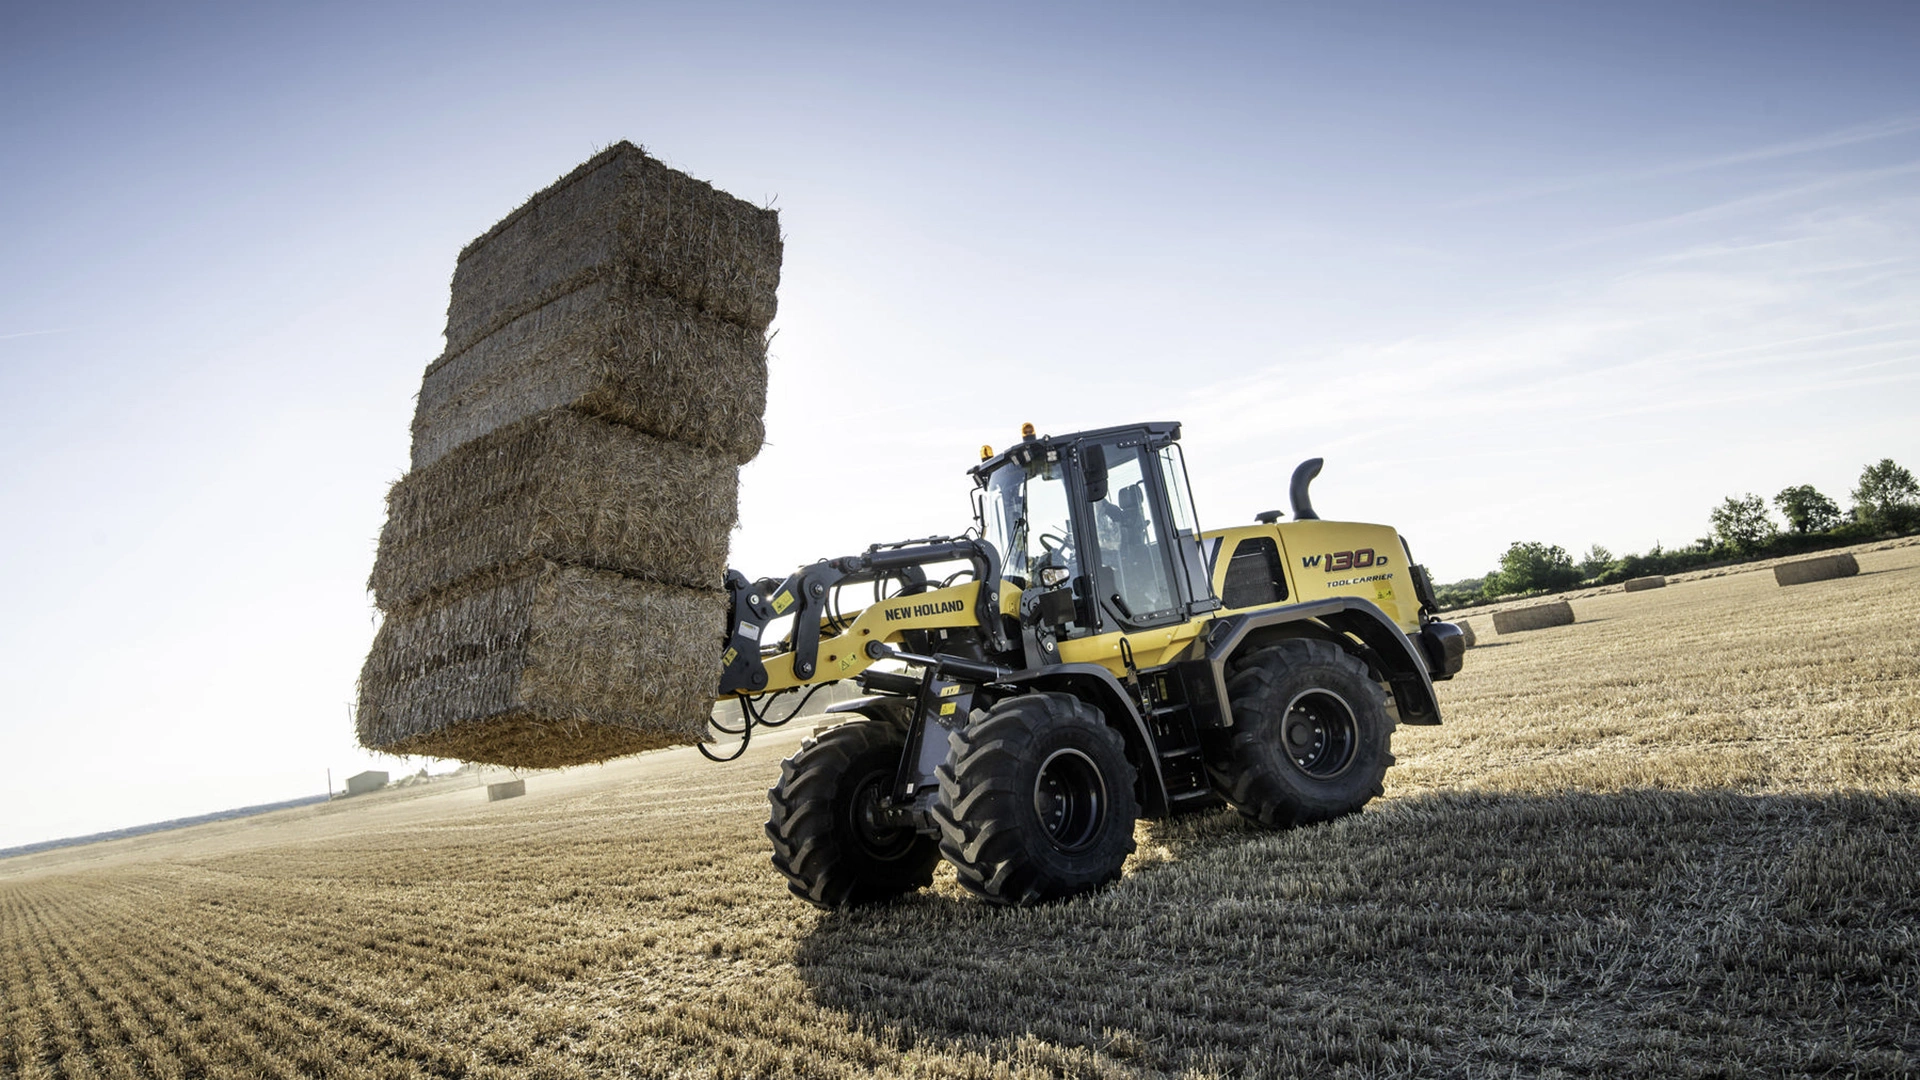 New Holland W130D wheel loader efficiently transporting a towering stack of hay bales on a sunny day in the field.